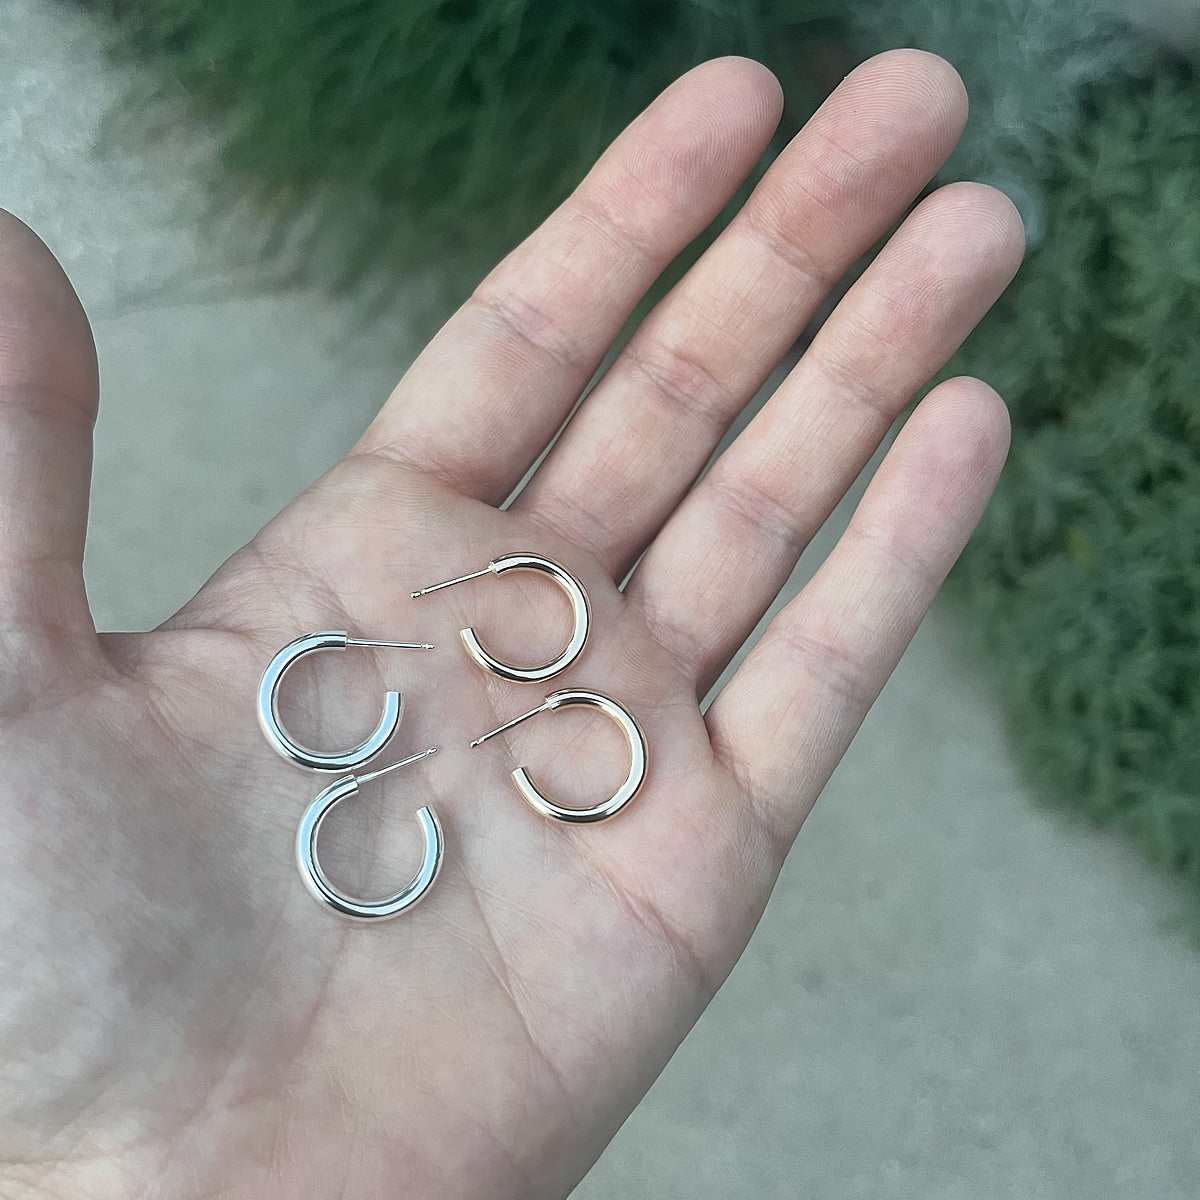 sterling silver and 14k gold filled hoops in a hand